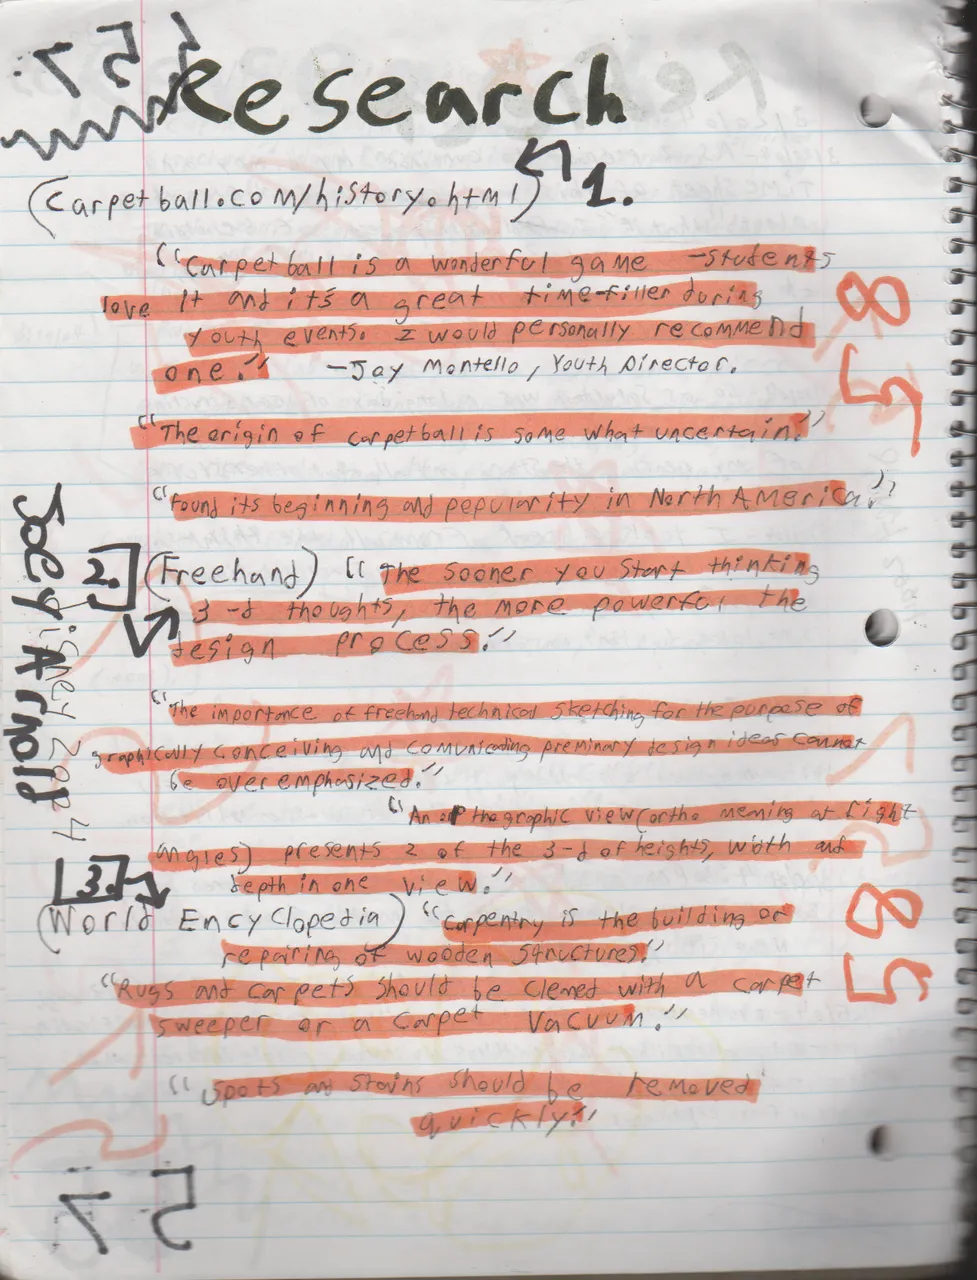 2004-01-29 - Thursday - Carpetball FGHS Senior Project Journal, Joey Arnold, Part 02, 96pages numbered, Notebook-56 ok.png